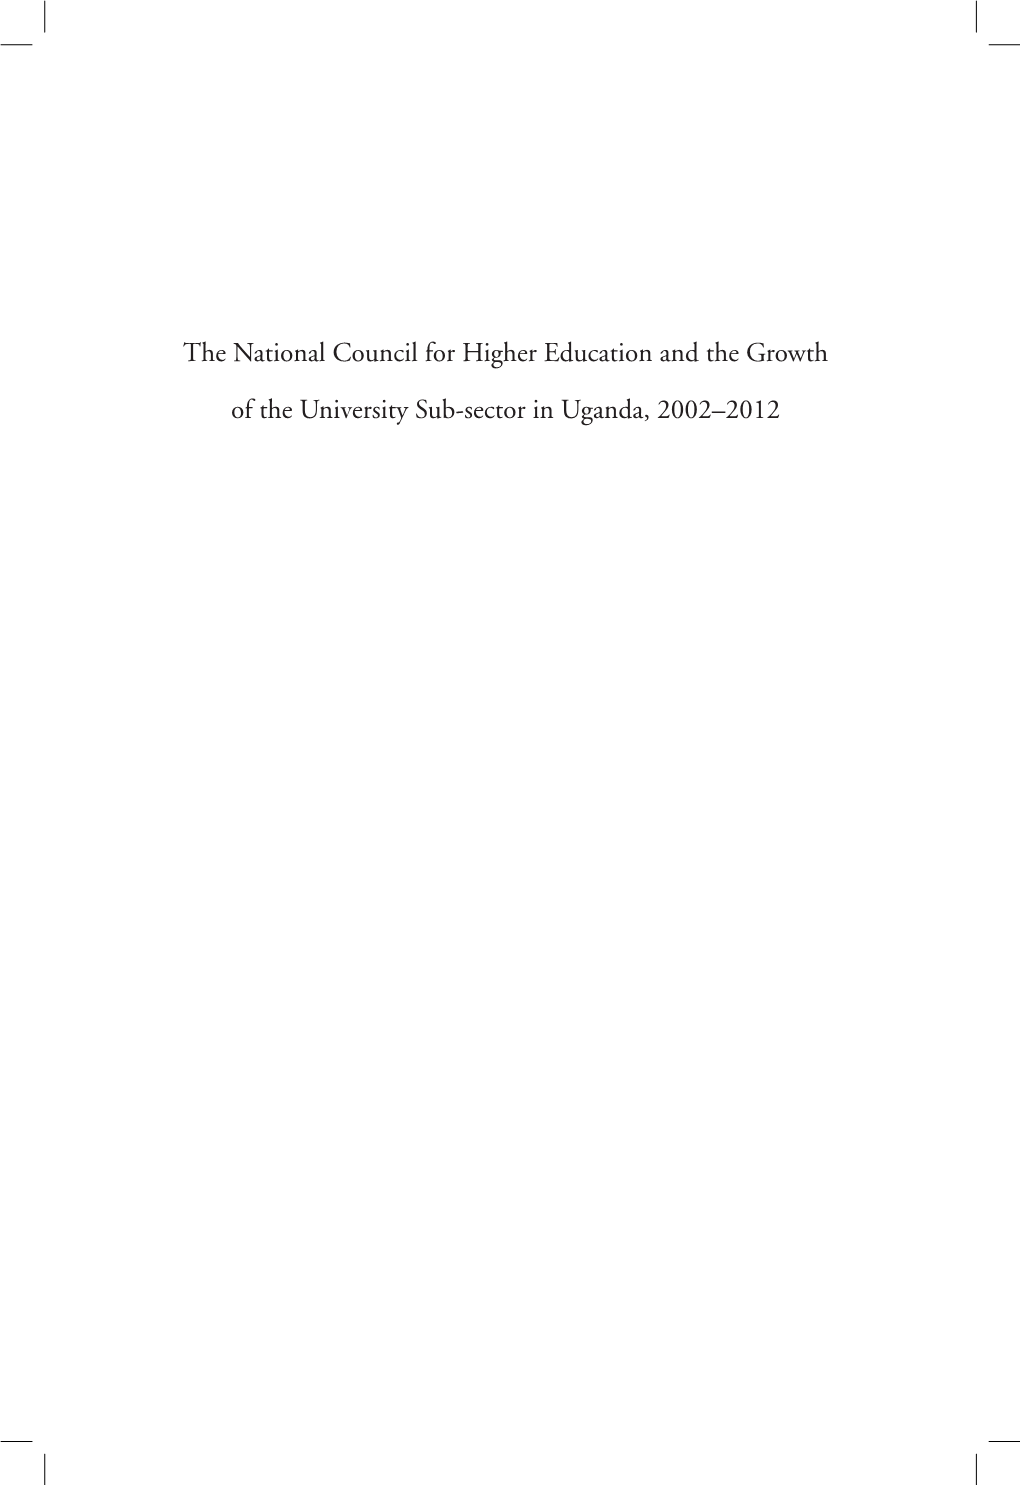 The National Council for Higher Education and the Growth of the University Sub-Sector in Uganda, 2002–2012